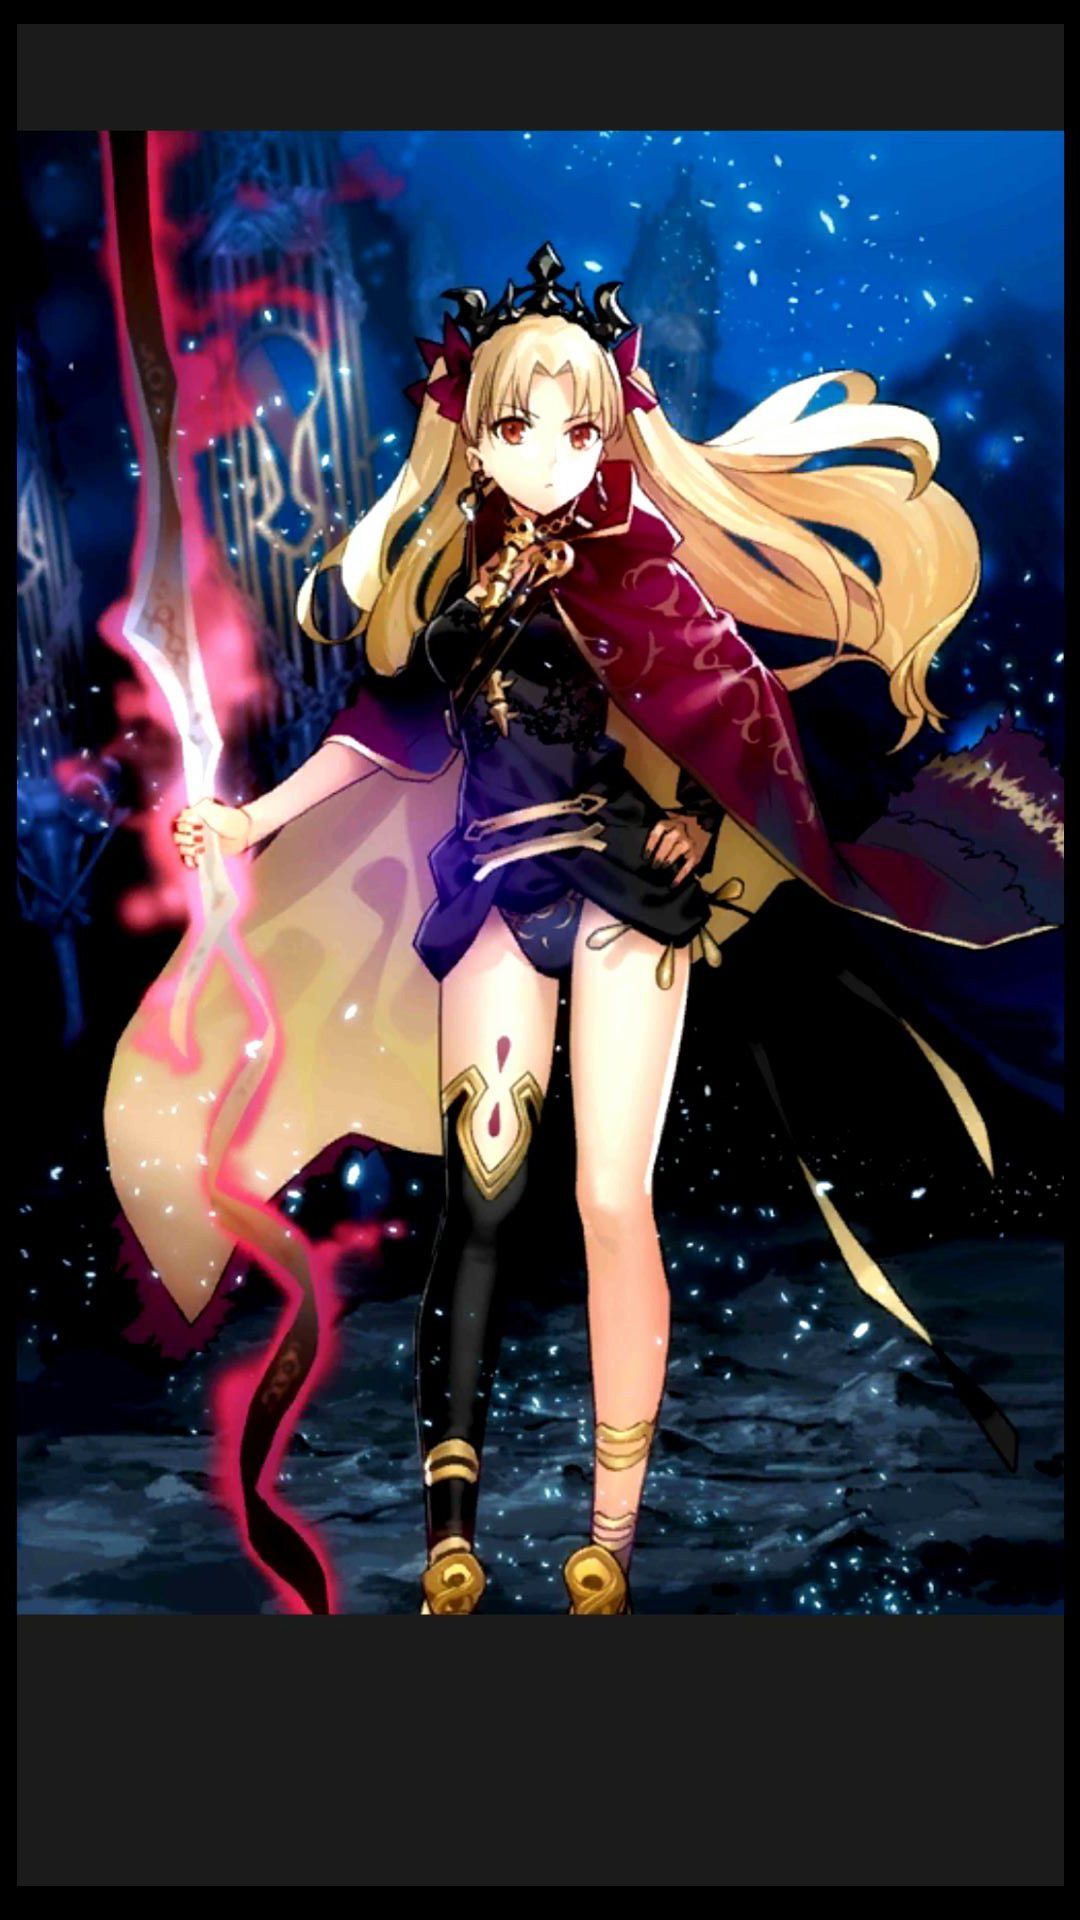 [Fate/Grand order] The final second coming illustrations cute Ereshkigal transcendence! 3